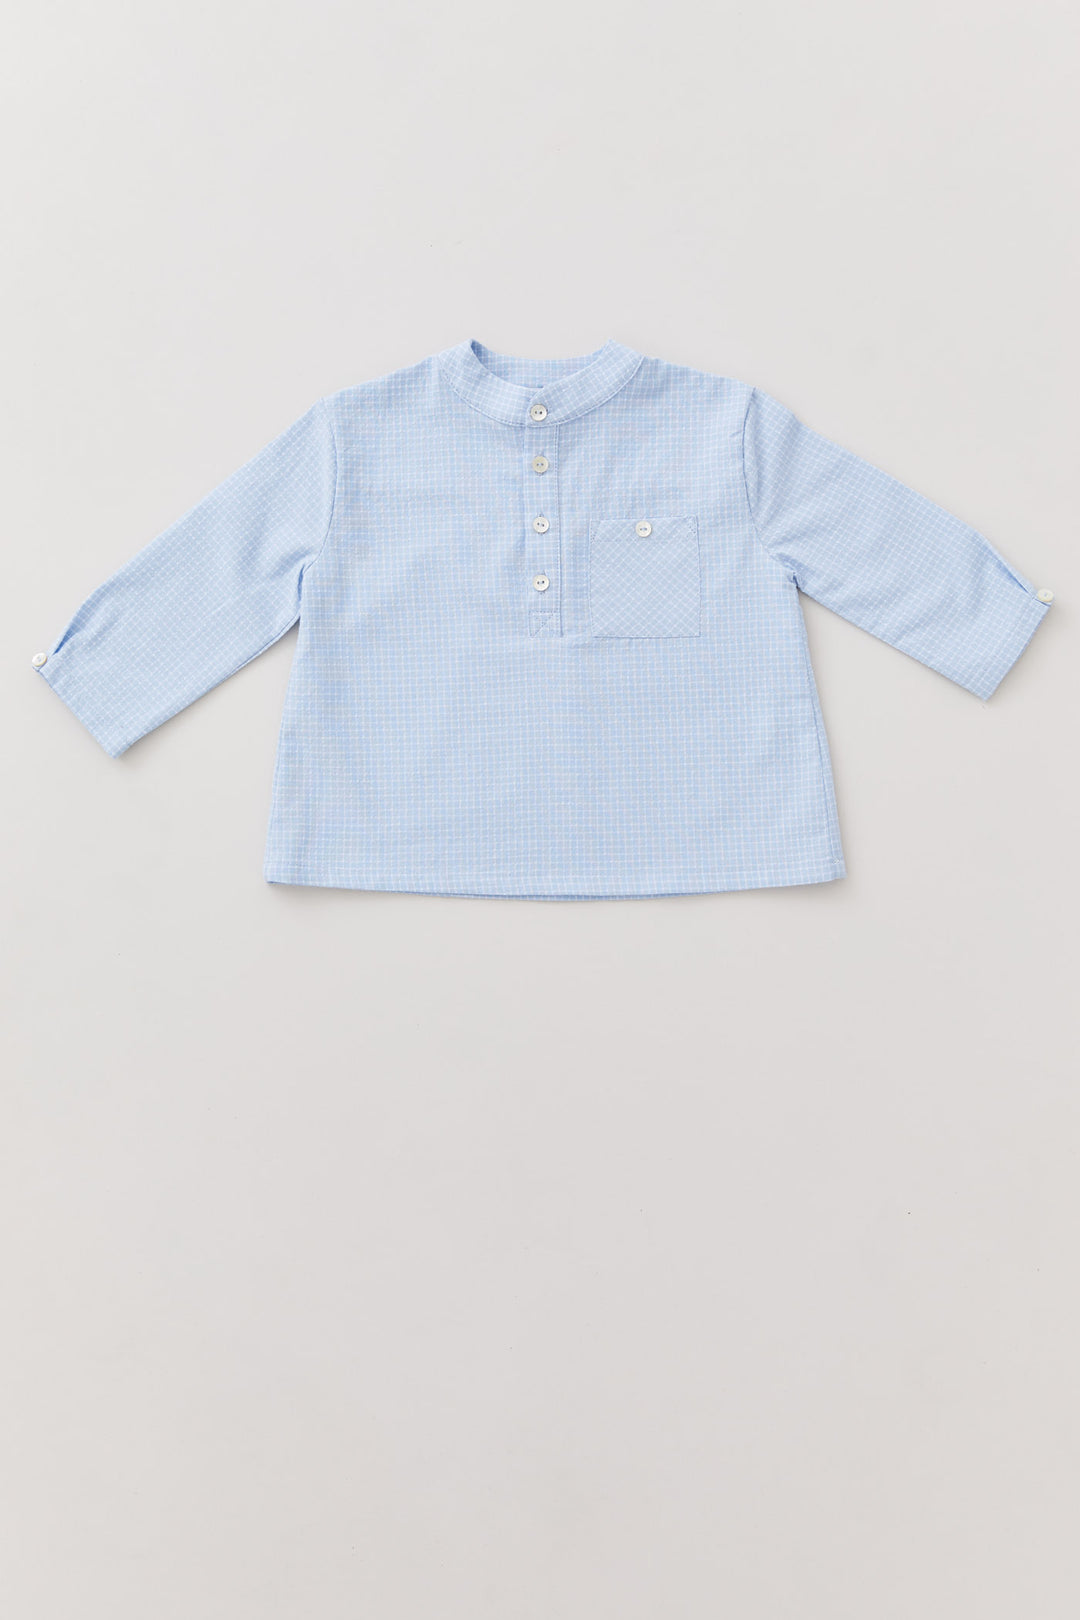 Apple Shirt in Icy Blue Check - Designed by Ingrid Lewis - Strawberries & Cream